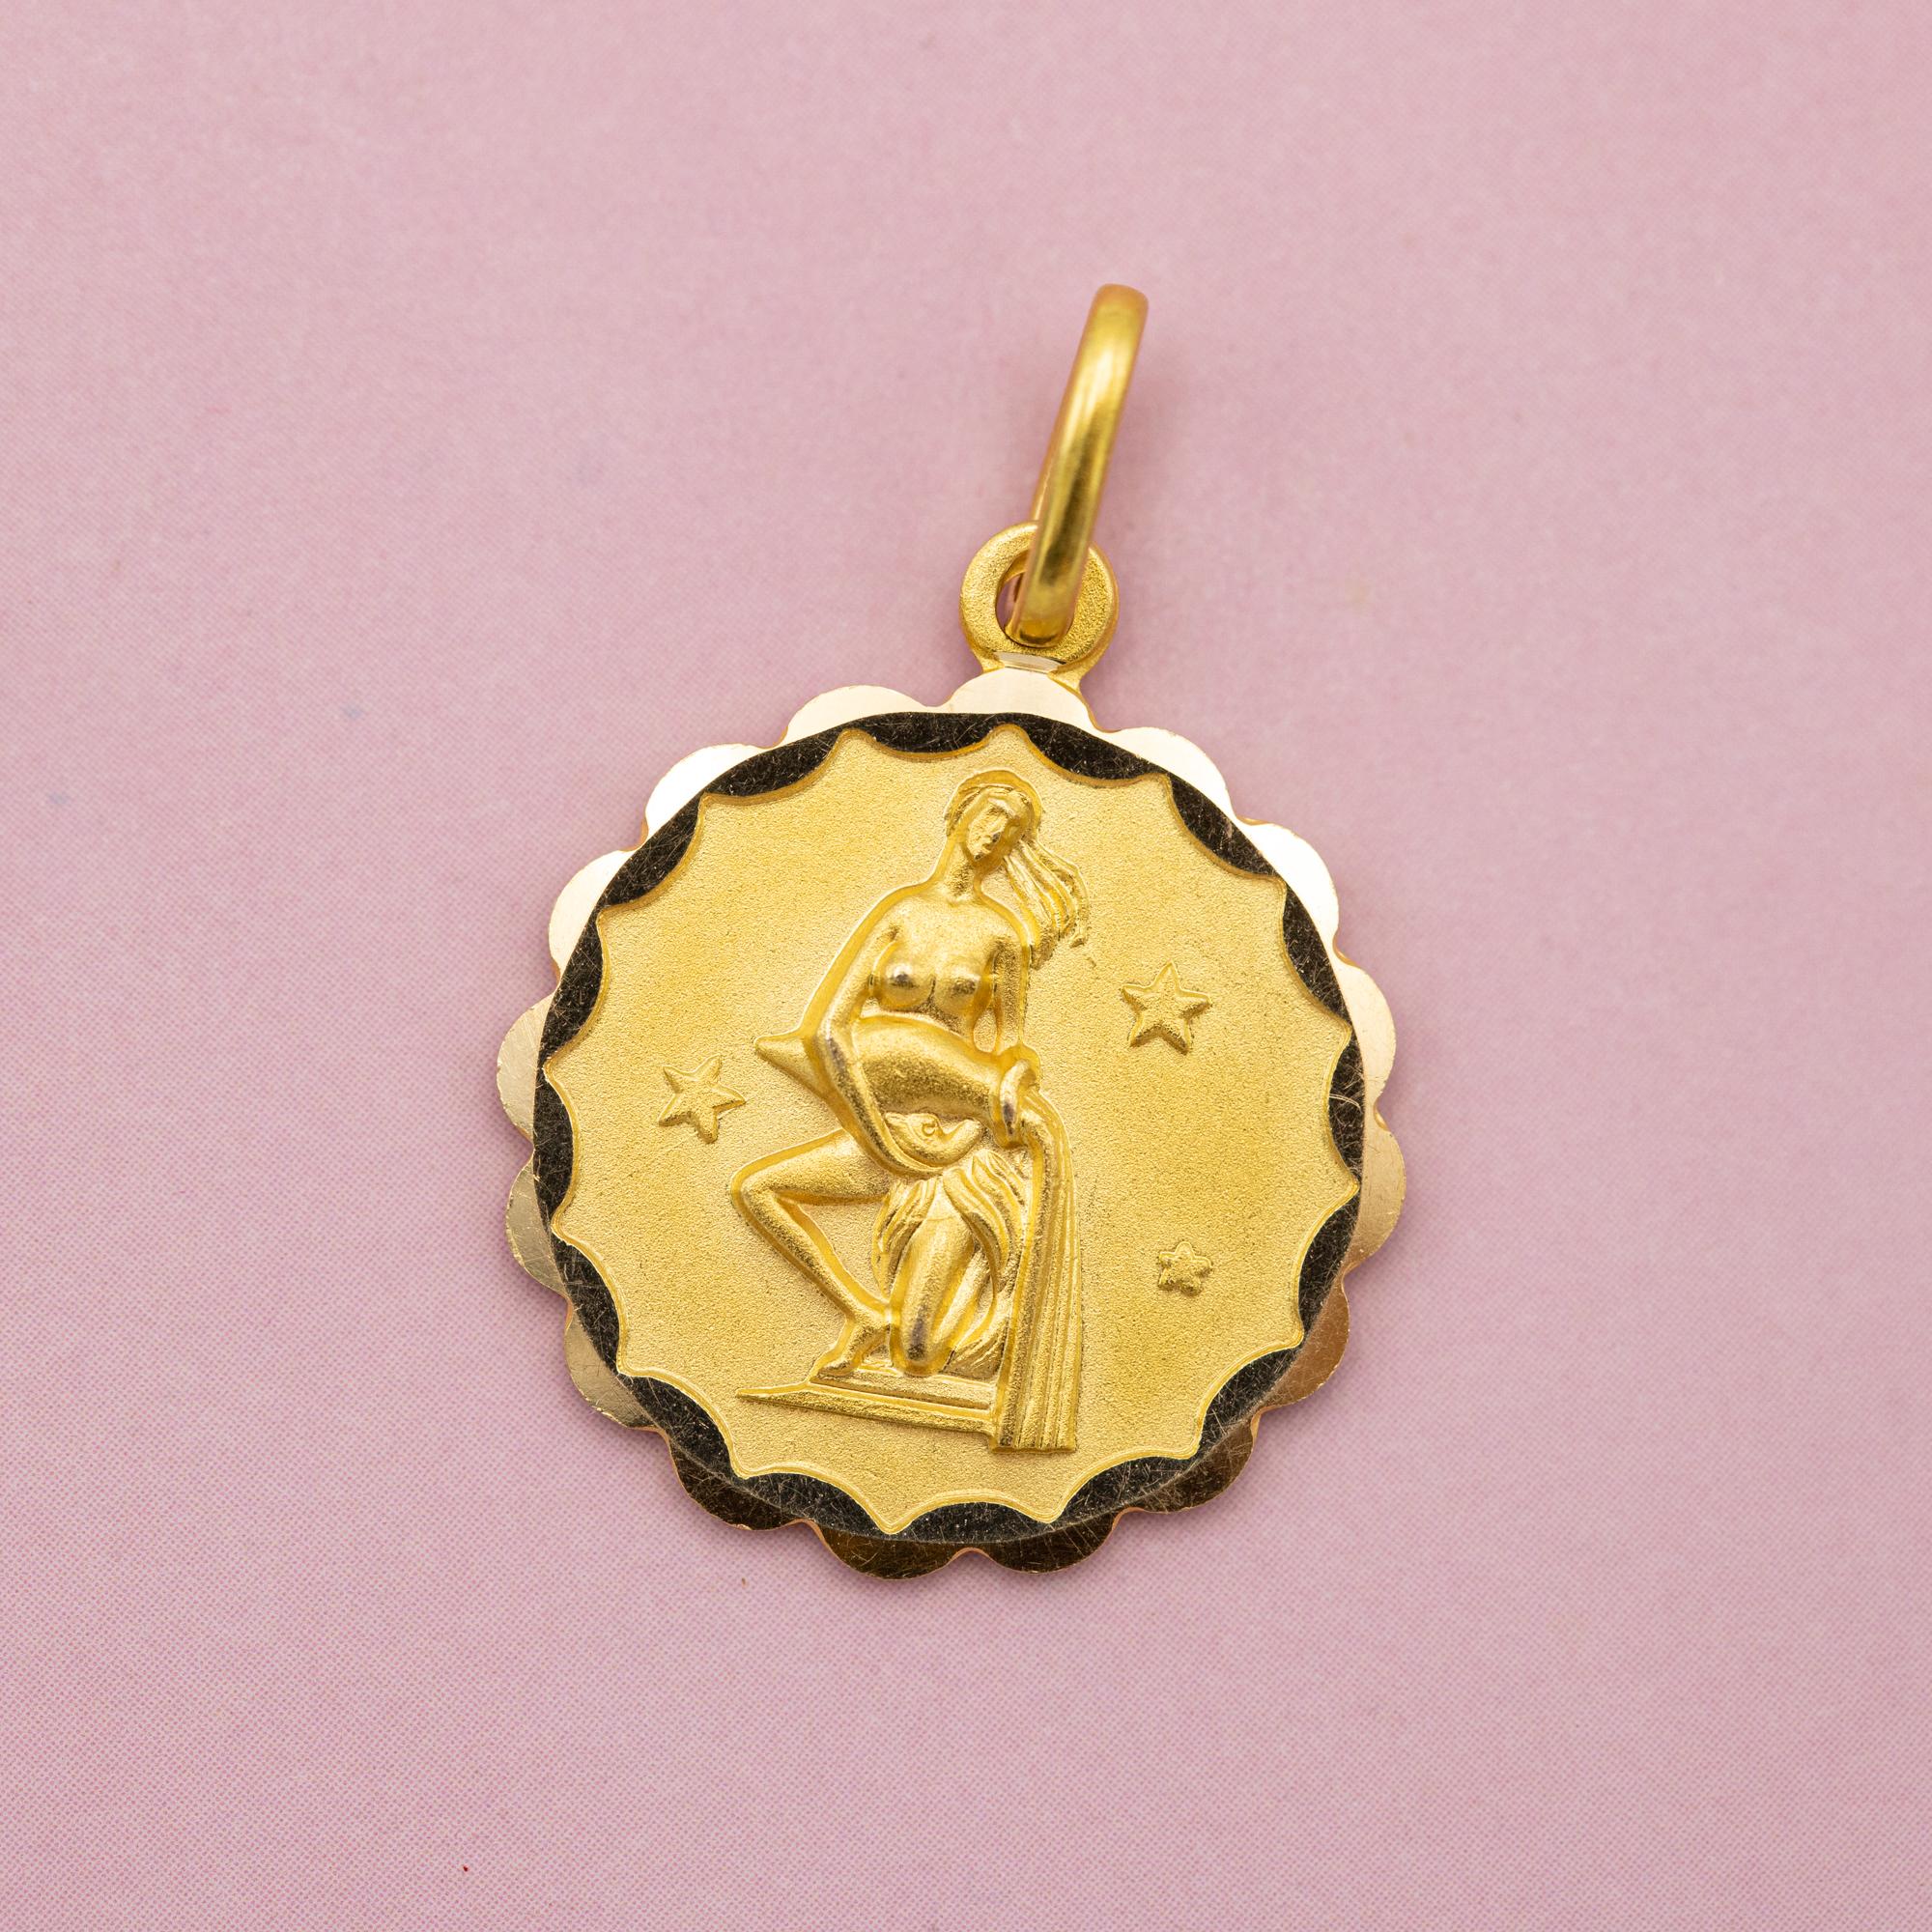 For sale is this vintage charm depicting an Aquarius, the eleventh astrological sign in the zodiac. This Constellation Star Sign Pendant is associated with the birth dates between 22 January and 21 February. This pretty charm is hallmarked with a